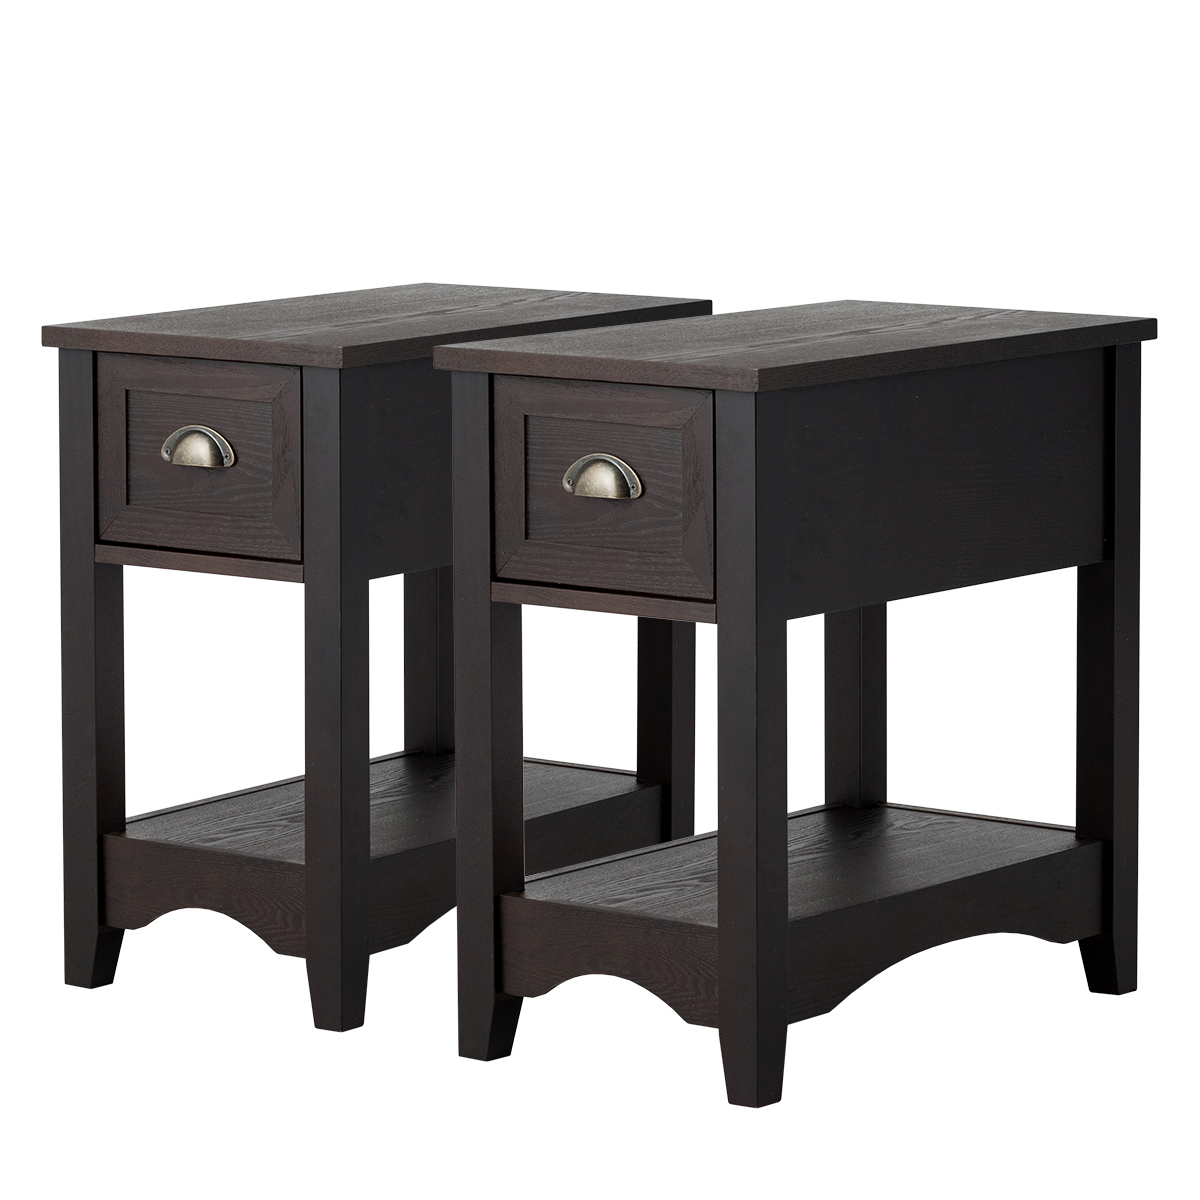 Set Of 2 Contemporary Side End Table Compact Table W/ Drawer Nightstand Espresso/Tawny/Walnut - Espresso